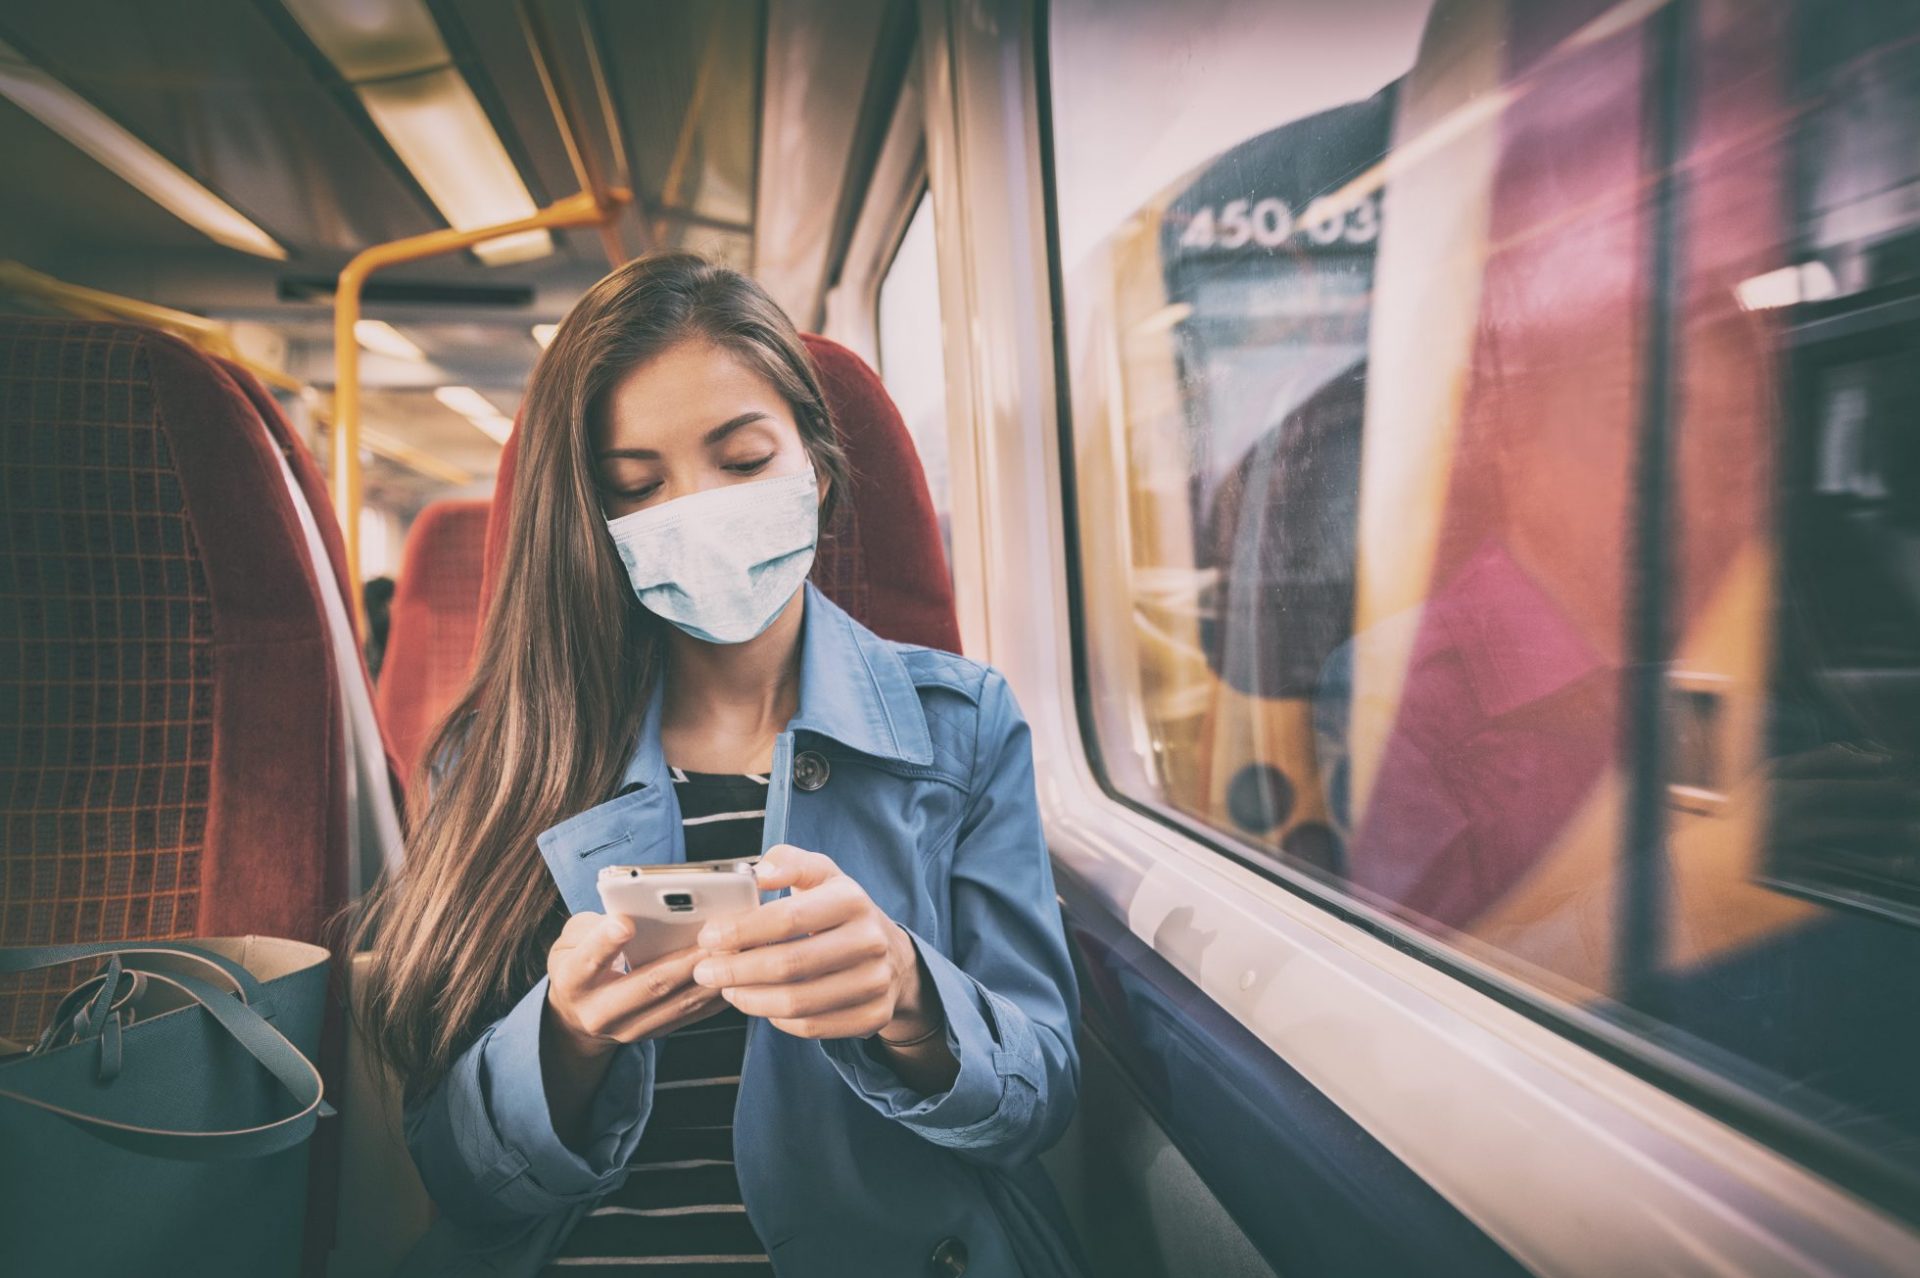 Young woman on train wearing mask and looking at smartphone